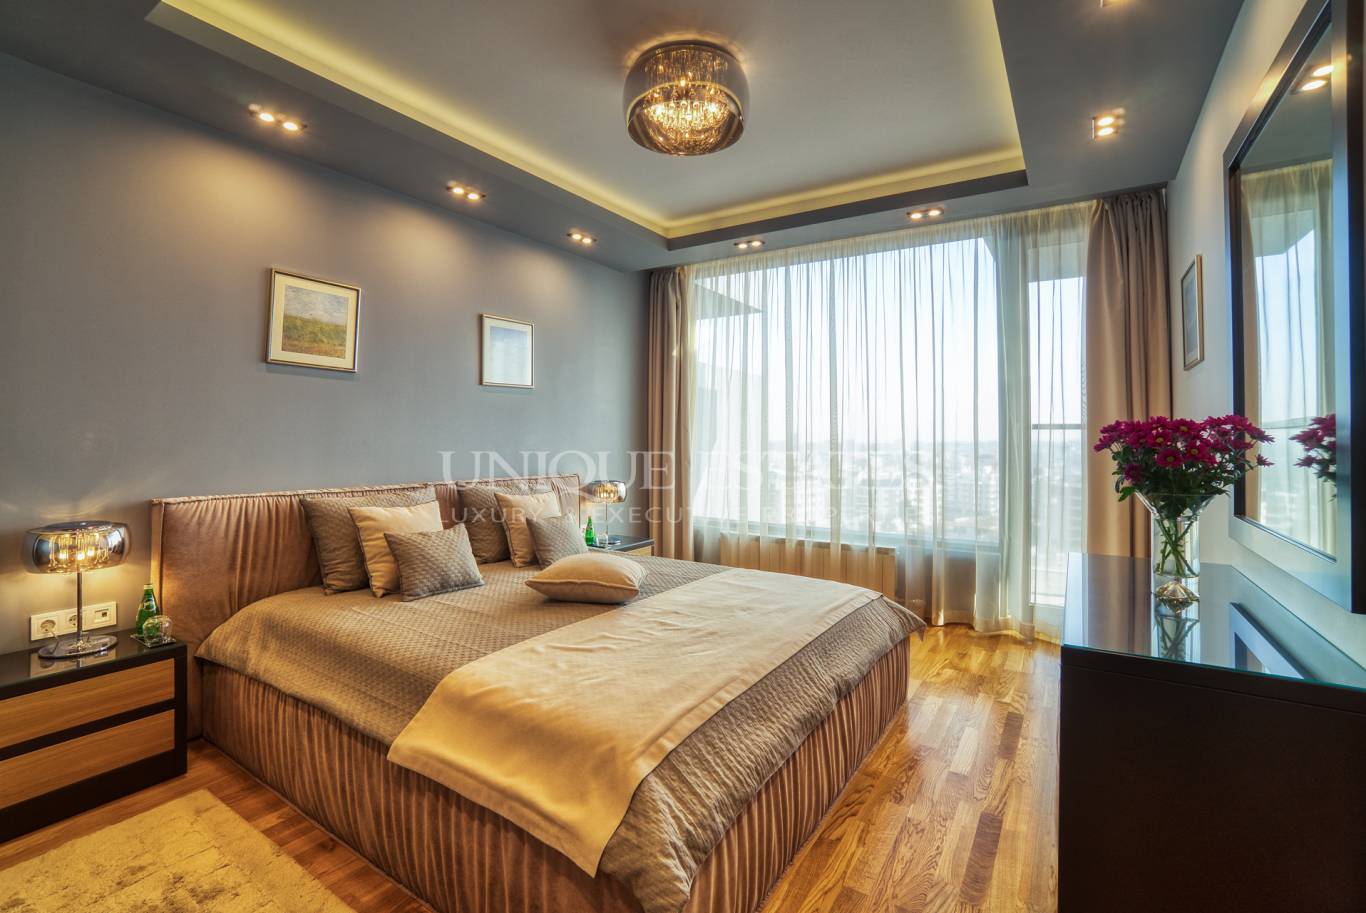 Apartment for sale in Sofia, Bulgaria Blvd with listing ID: E12623 - image 11